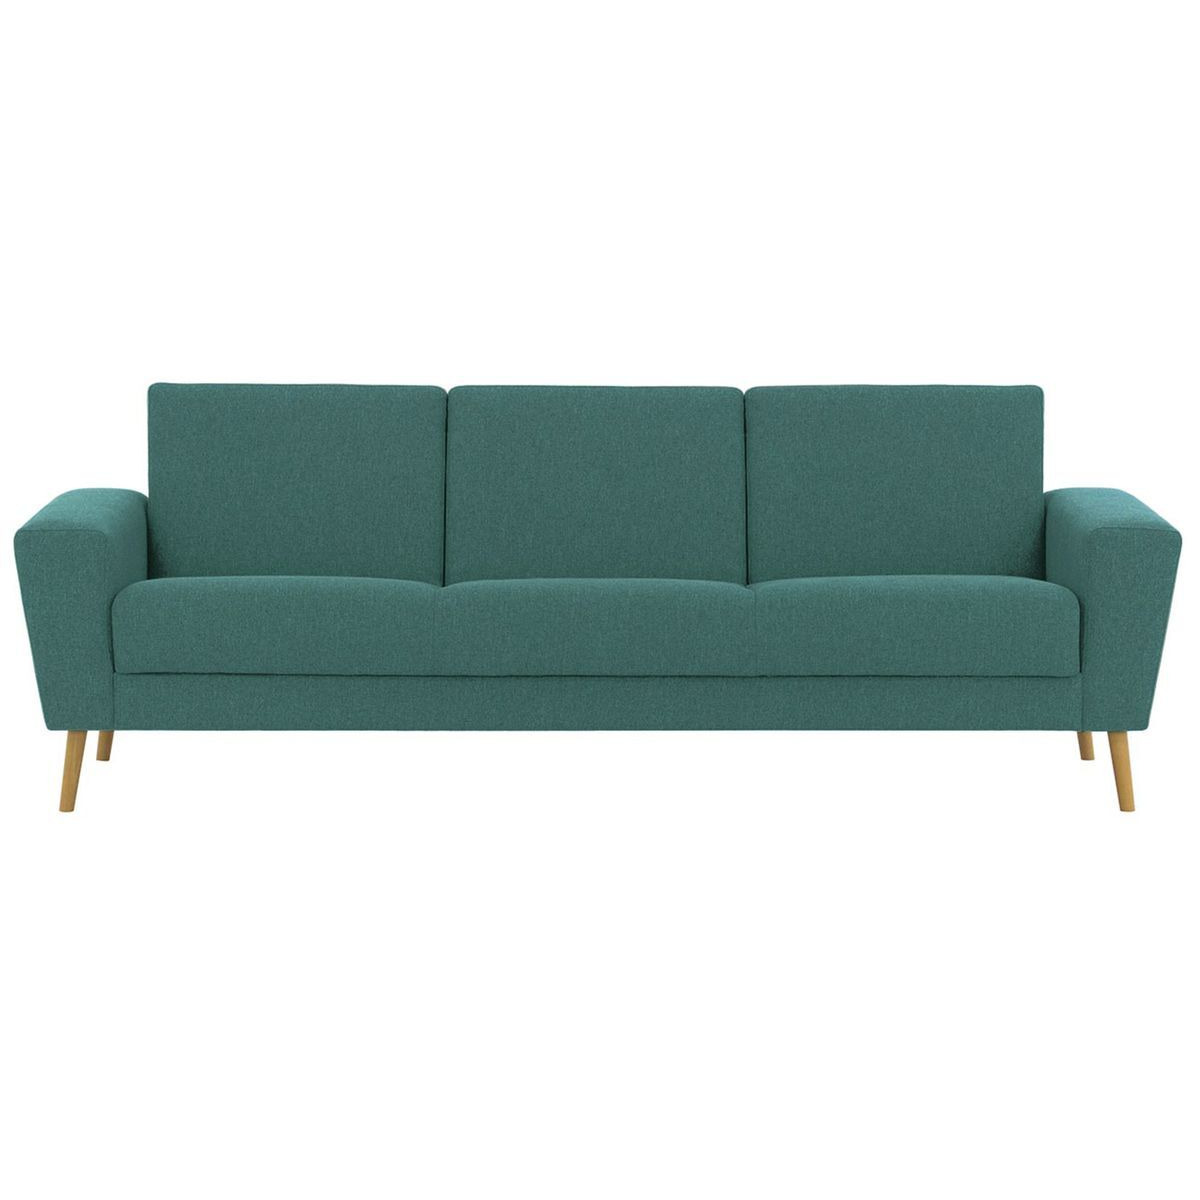 Cosy Fold-Out Sofa Bed, turquoise - image 1